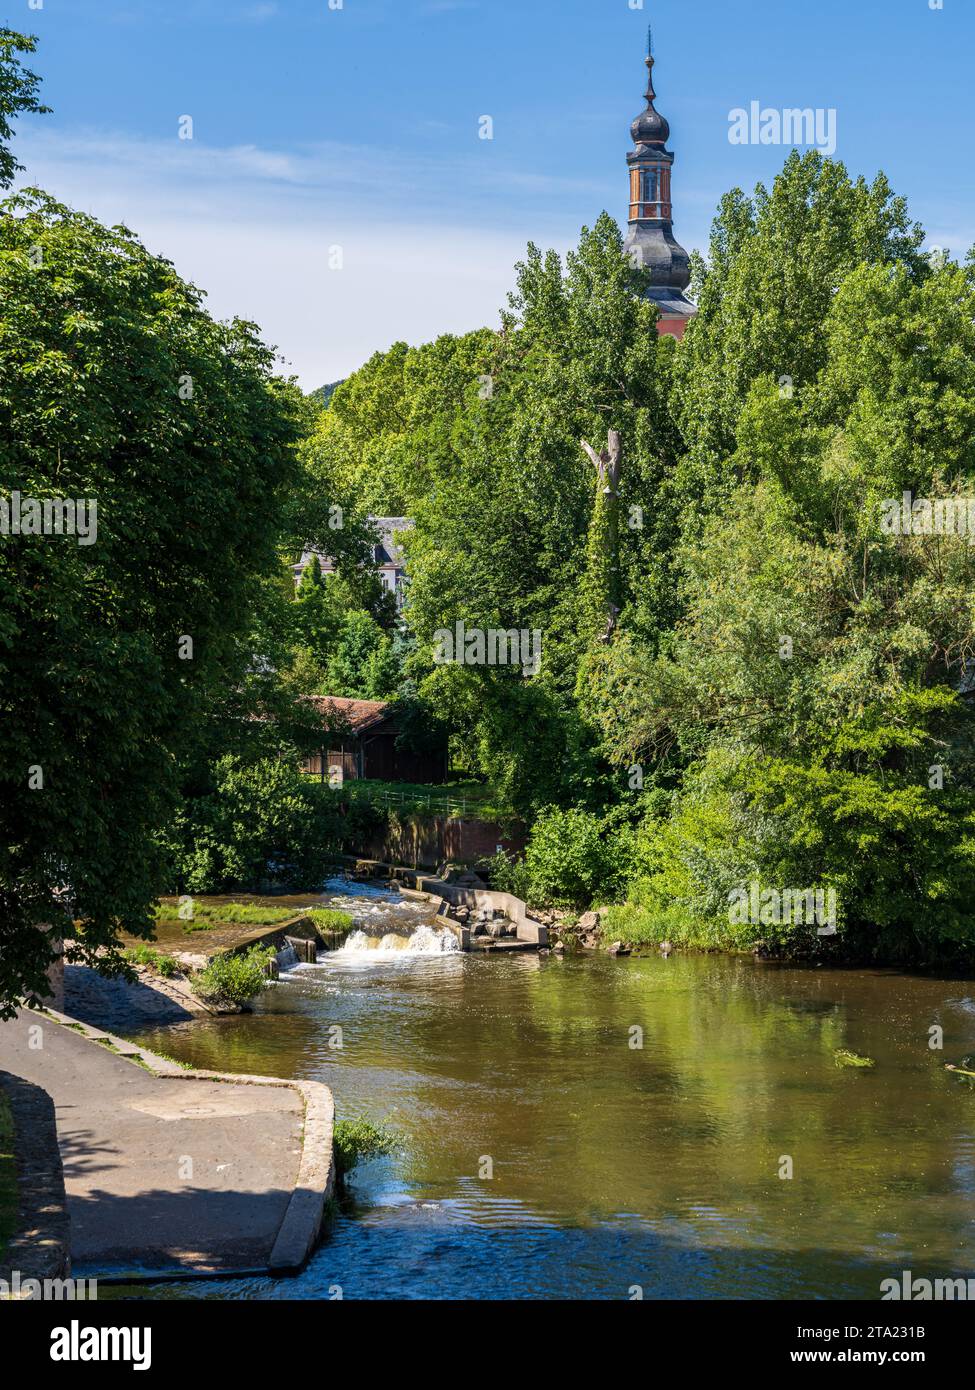 Bad Kreuznach, Rhineland-Palatine, Germany - June 29, 2021: View at the River Nahe and the Pauluskirche in the background Stock Photo